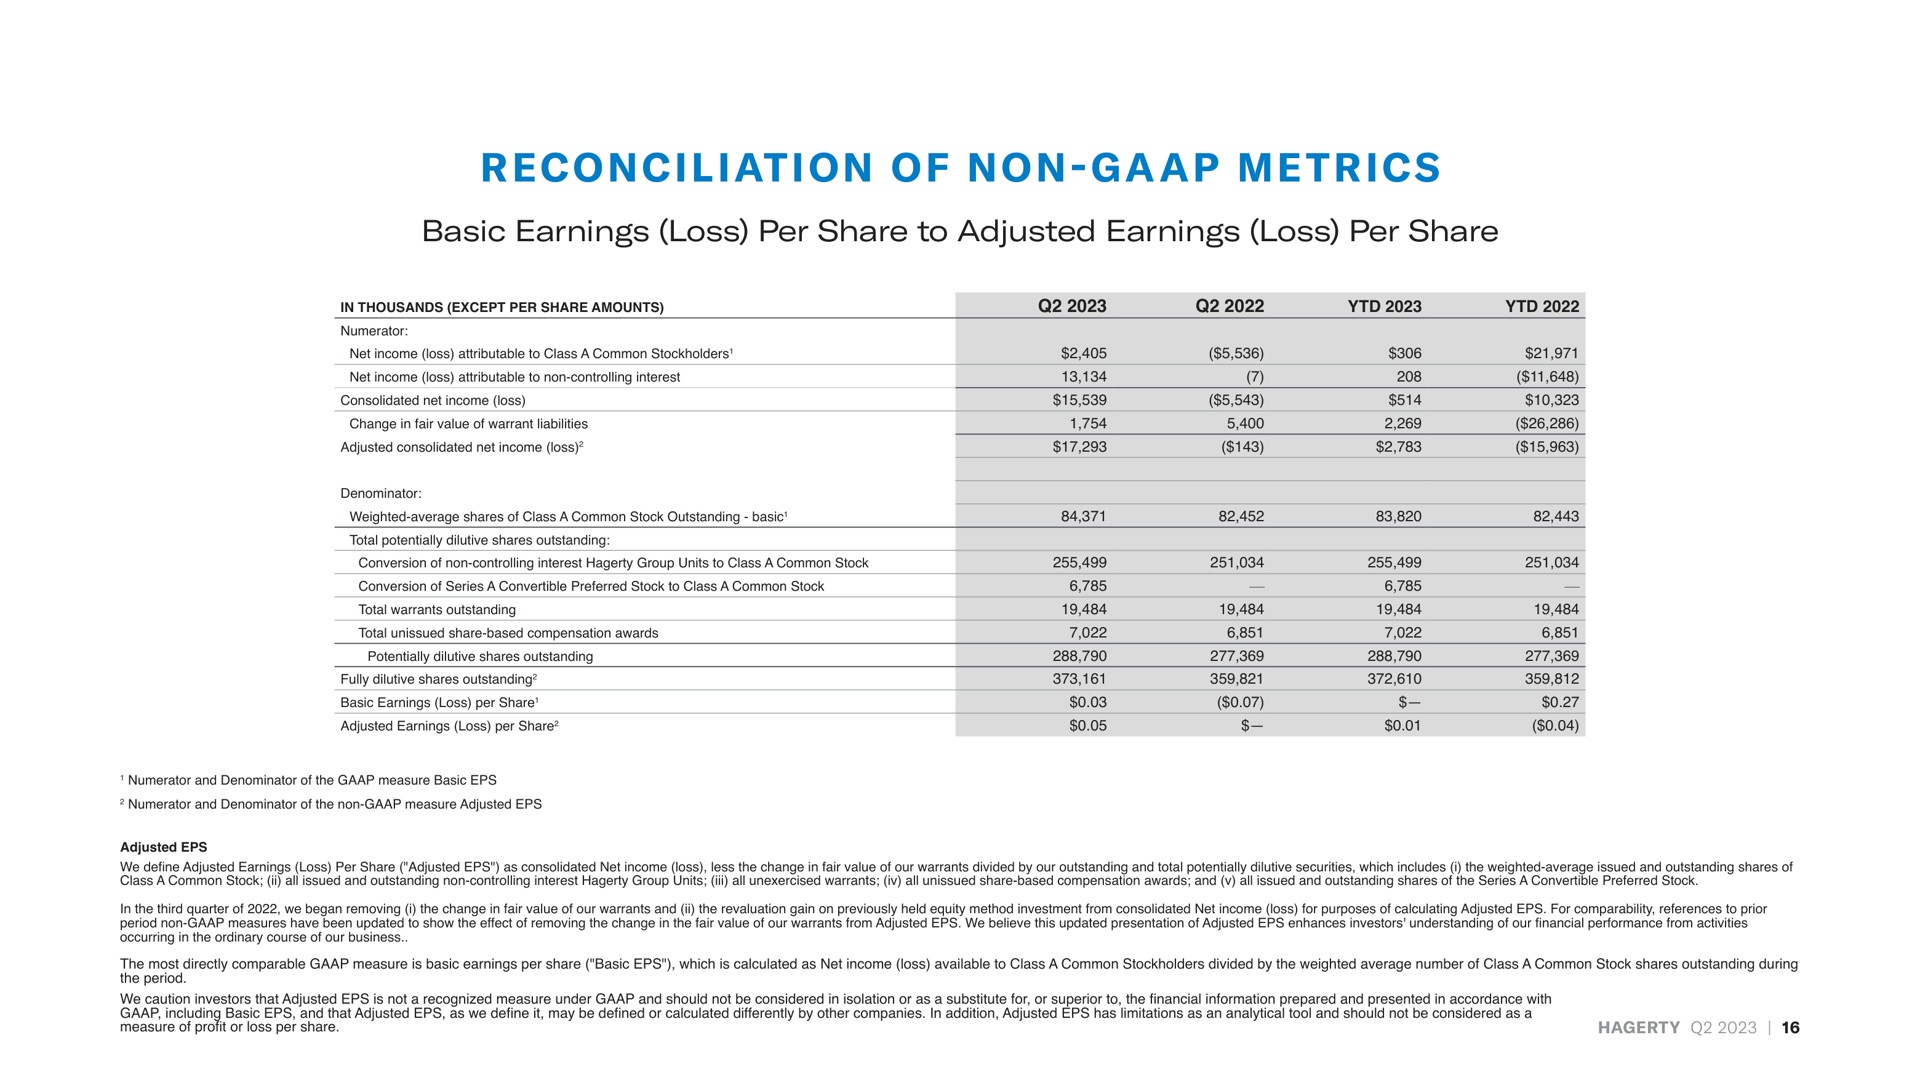 on ion of non a i basic earnings loss per share to adjusted earnings loss per share reconciliation non metrics | Hagerty